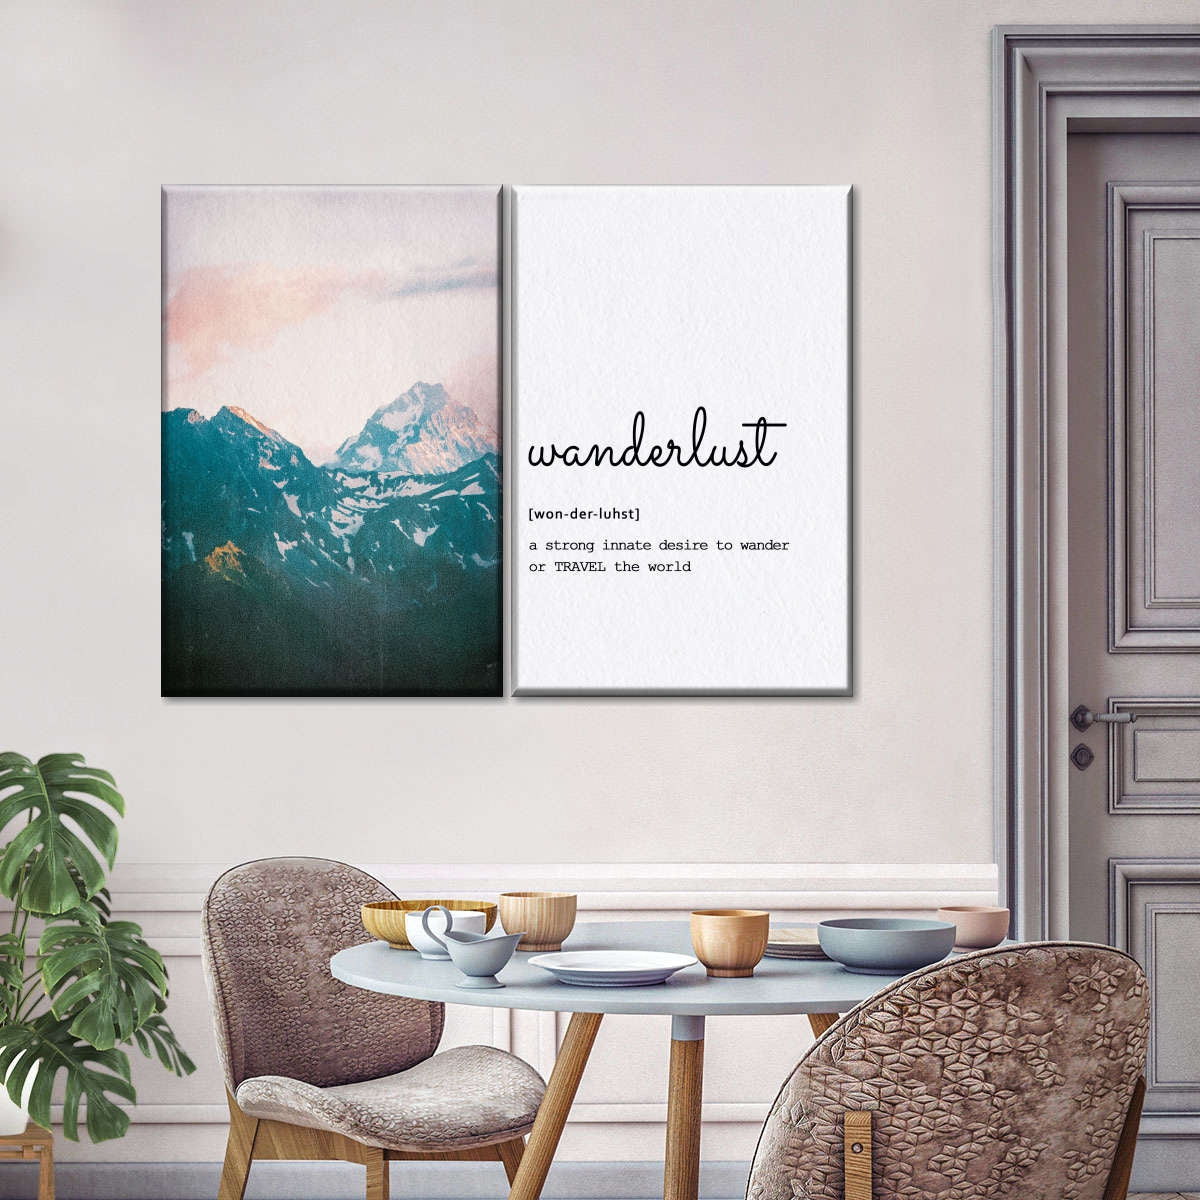 How to Pair Words with Wall Art